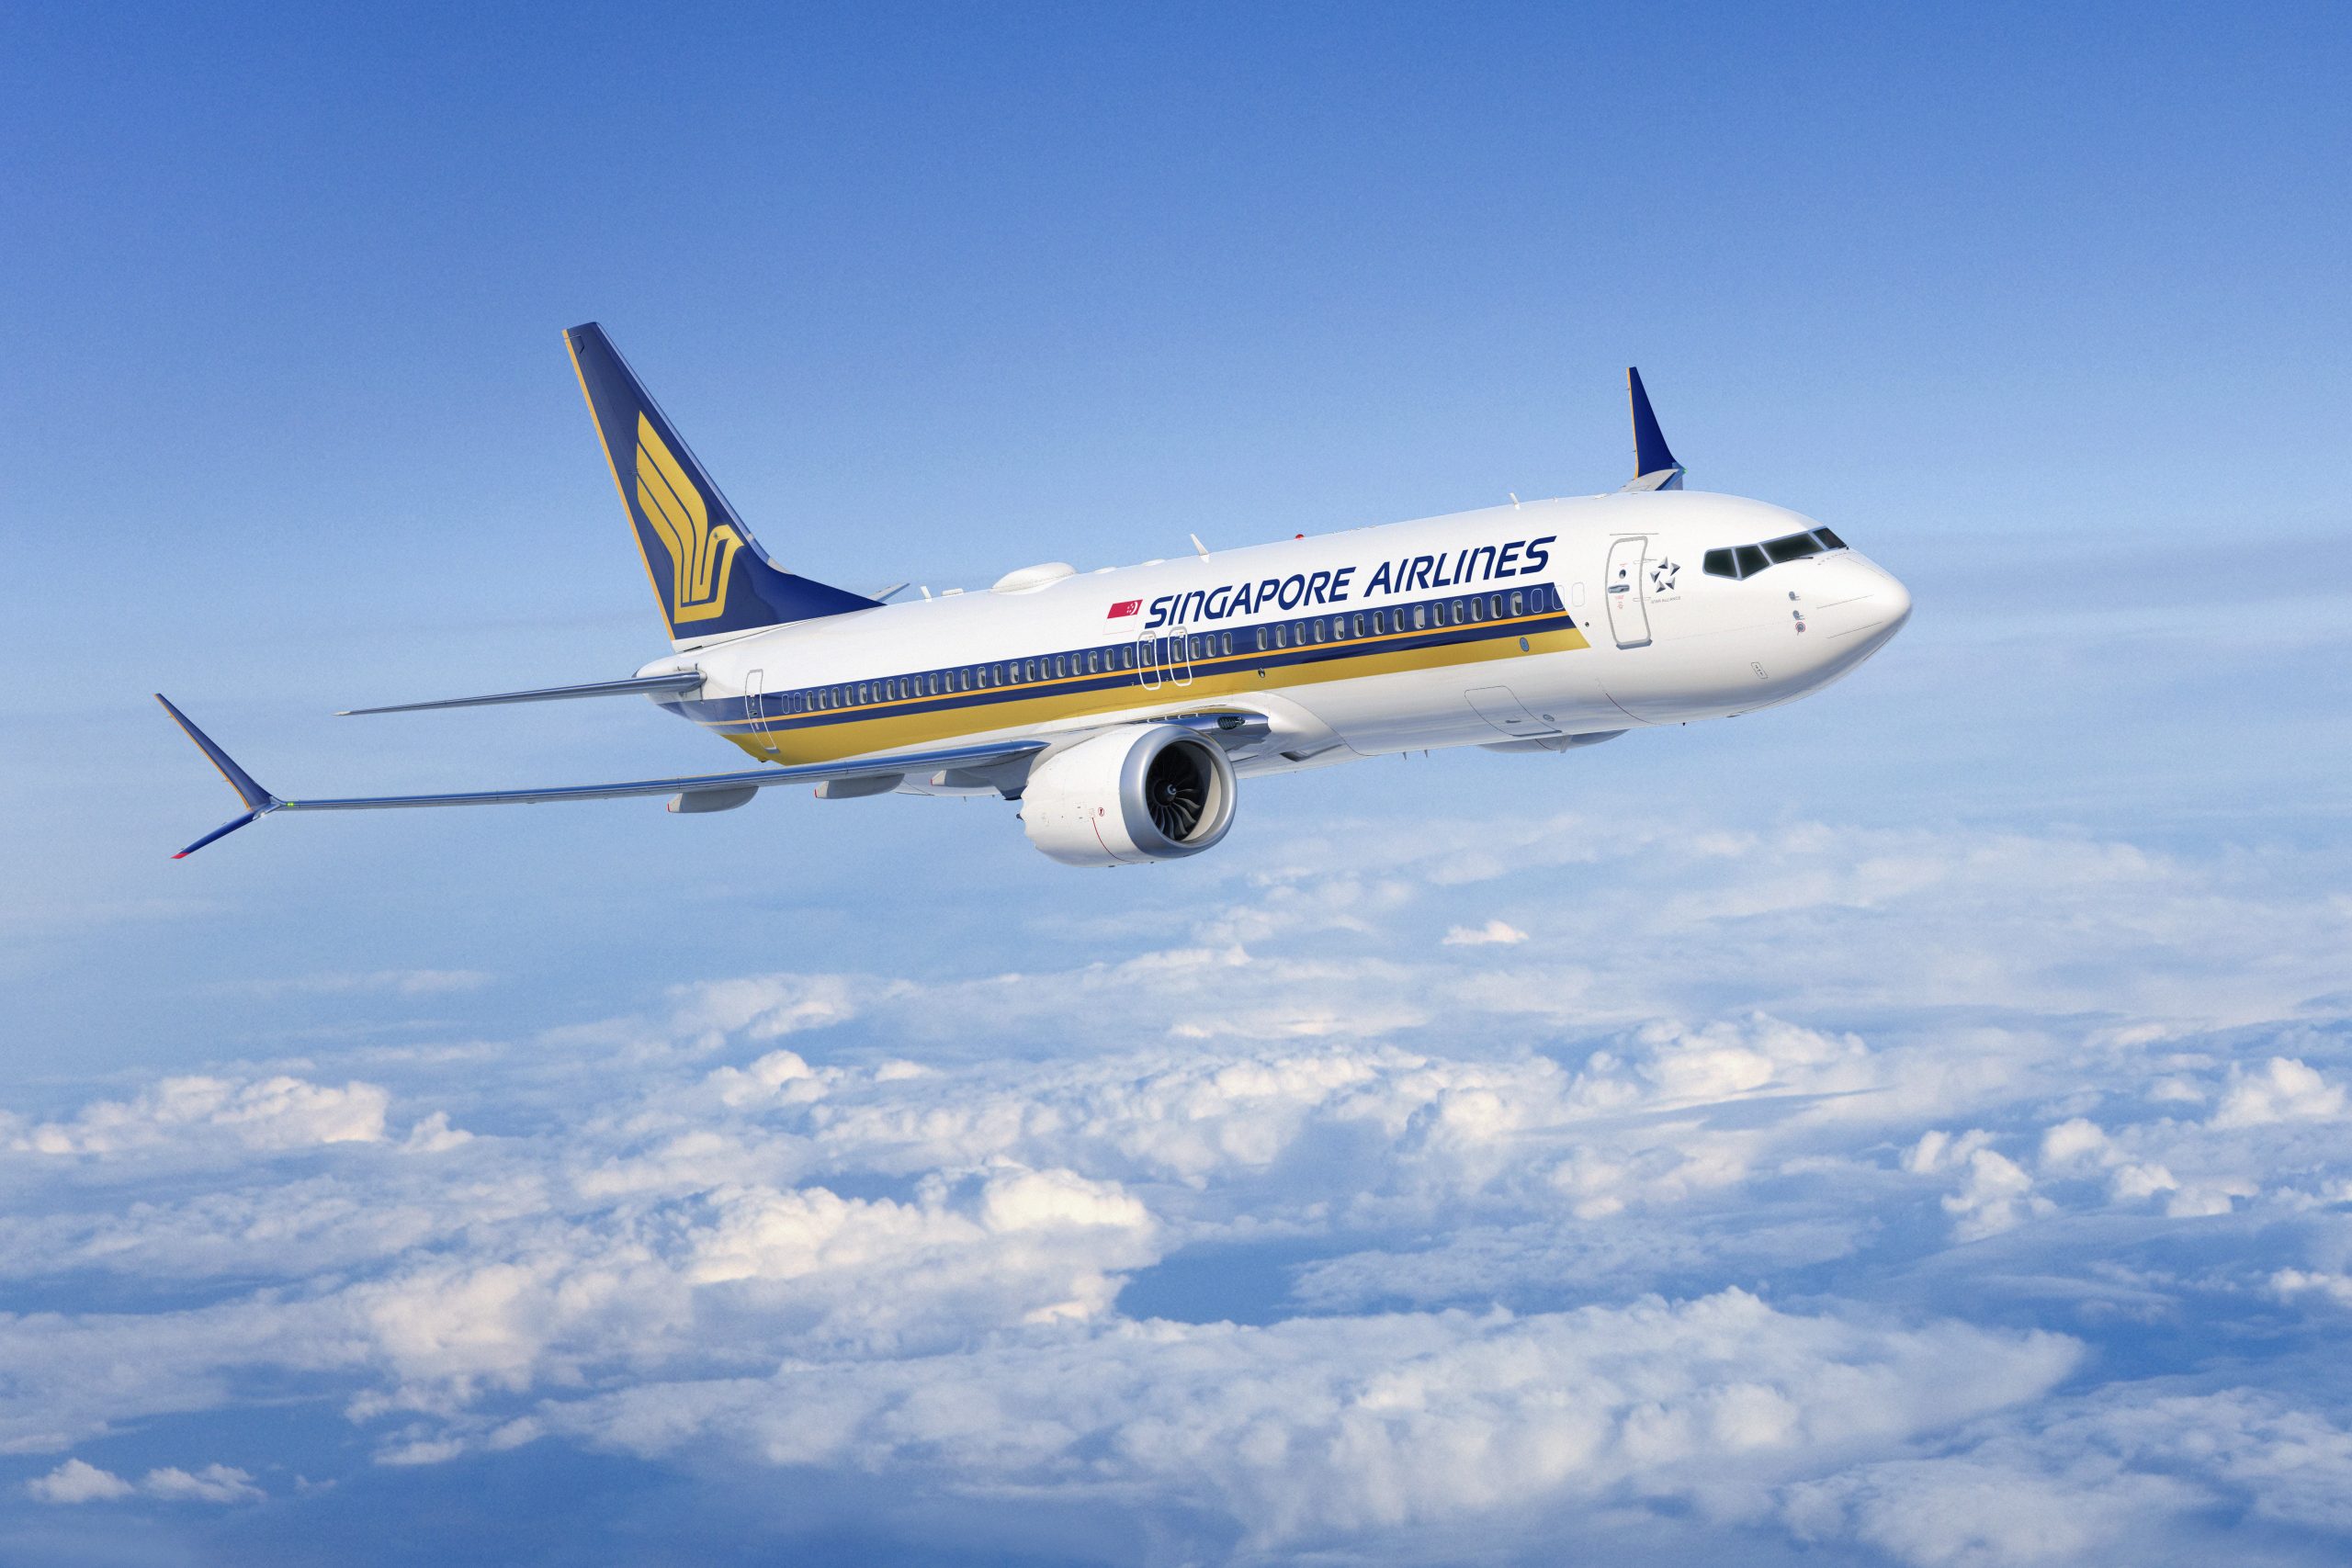 A Singapore Airlines aircraft. Photo: Singapore Airlines